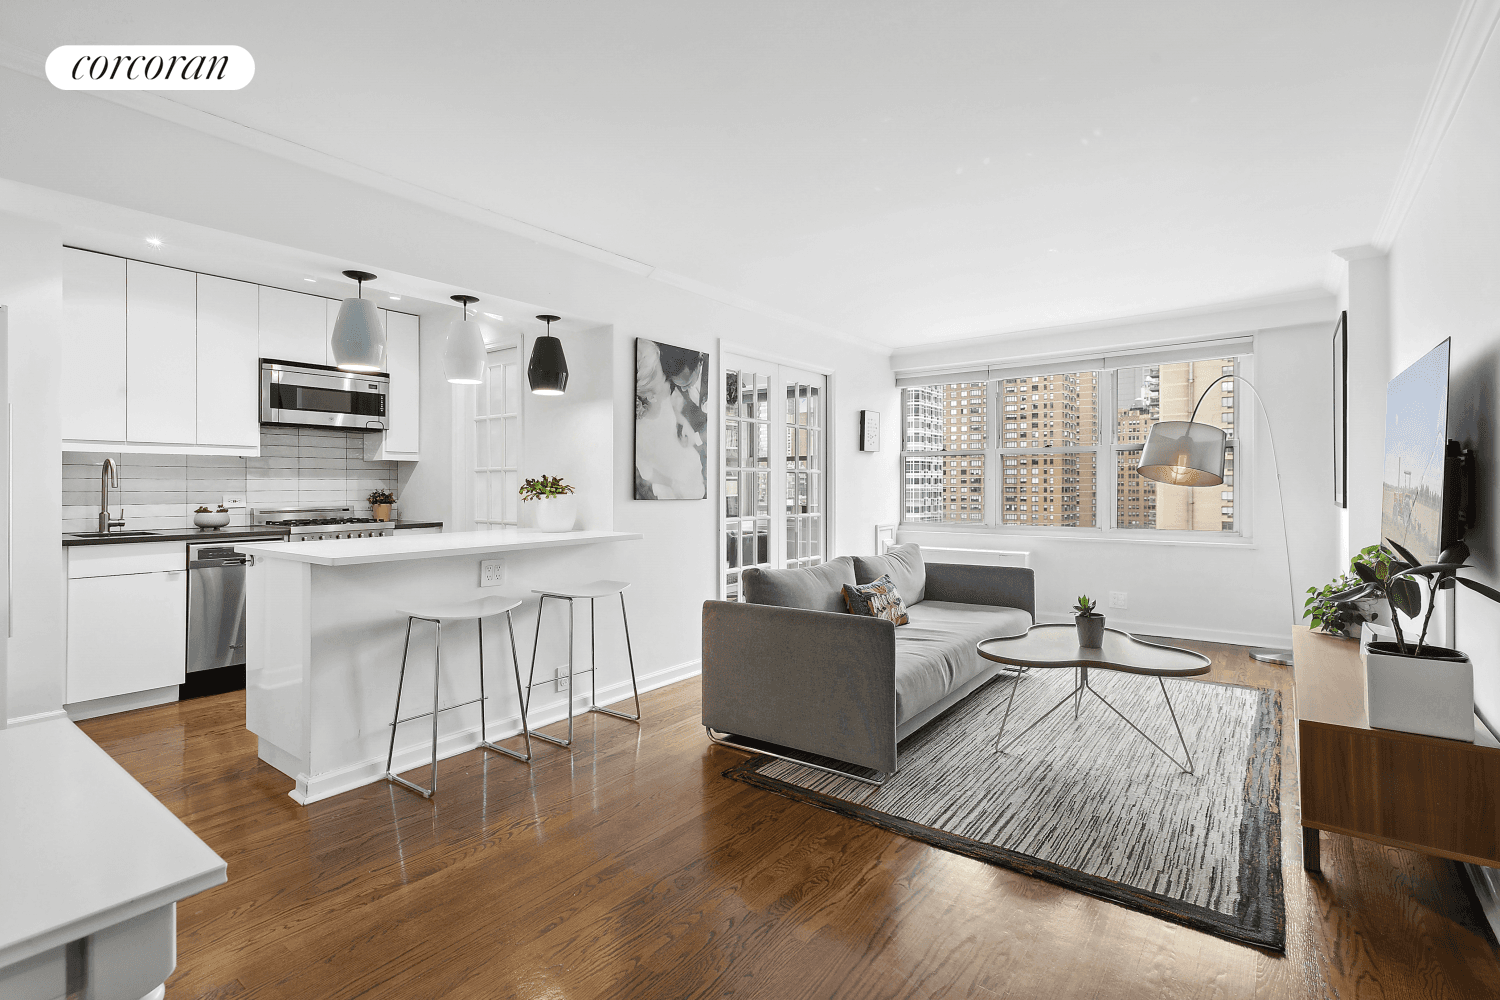 Spacious, Open Concept Living Renovated Kitchen Sun flooded Space Full Amenity PackageResidence 12A at 251 East 32nd Street welcomes you with expansive western city views flooding the space with light.